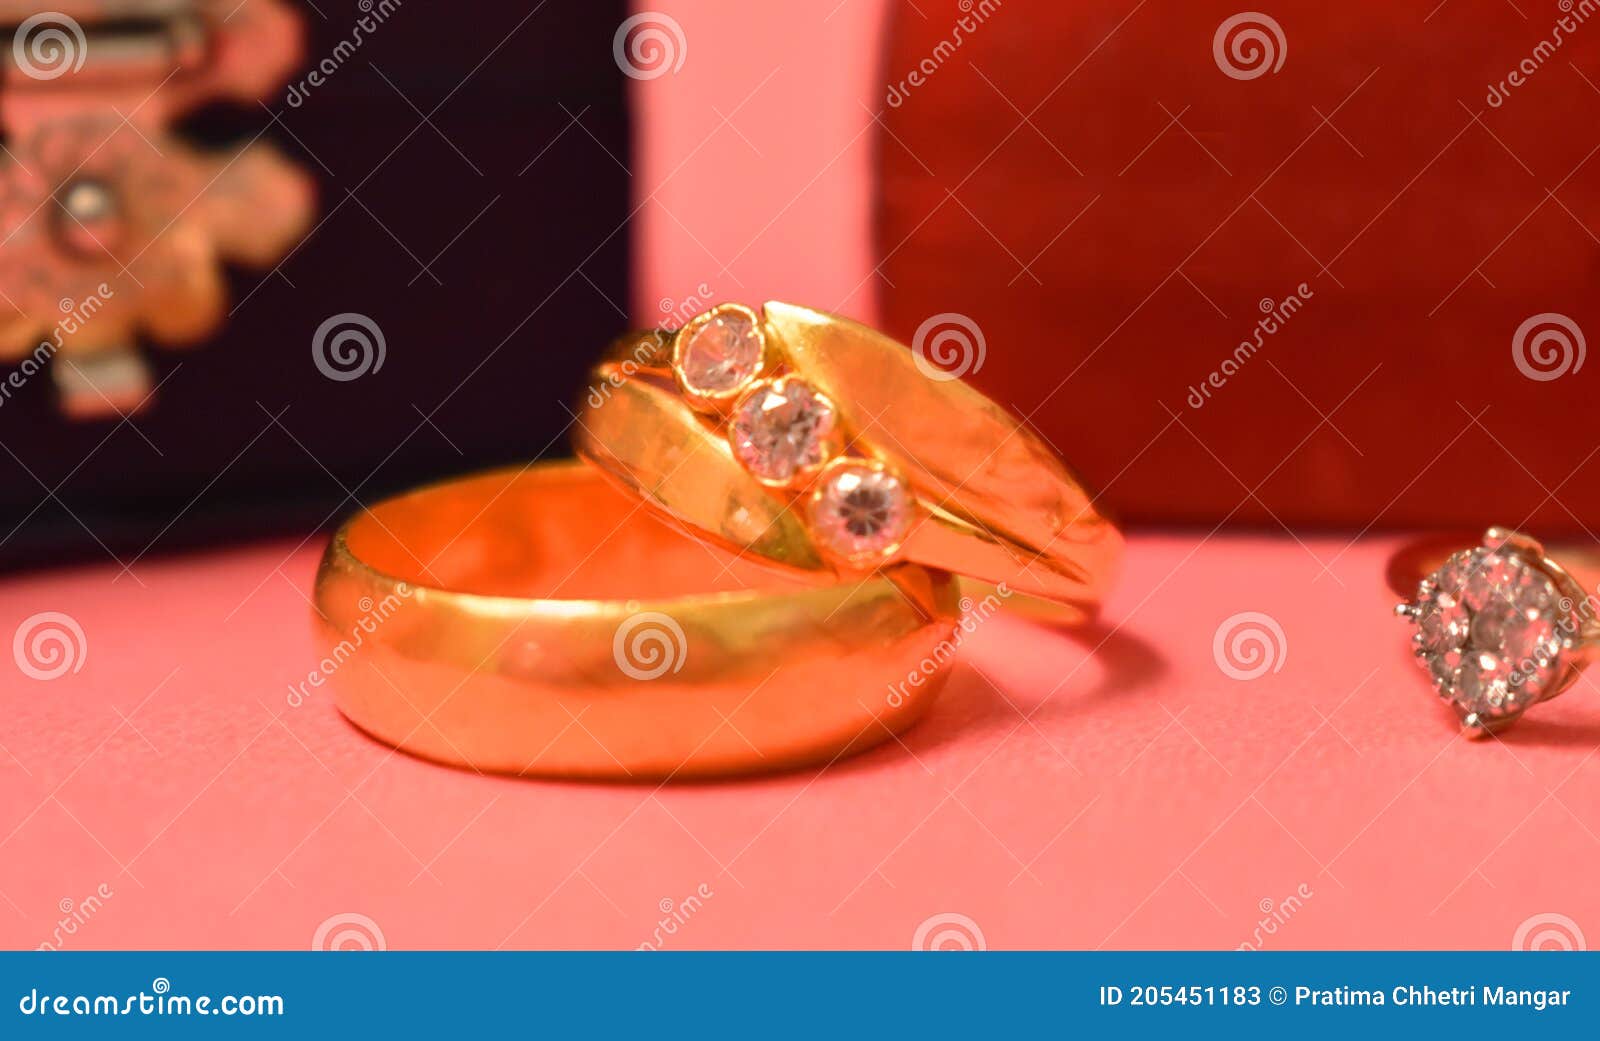 couple rings gold color relationship tradition red close up married wedding engagement love emotion table men women lifestyle no 205451183